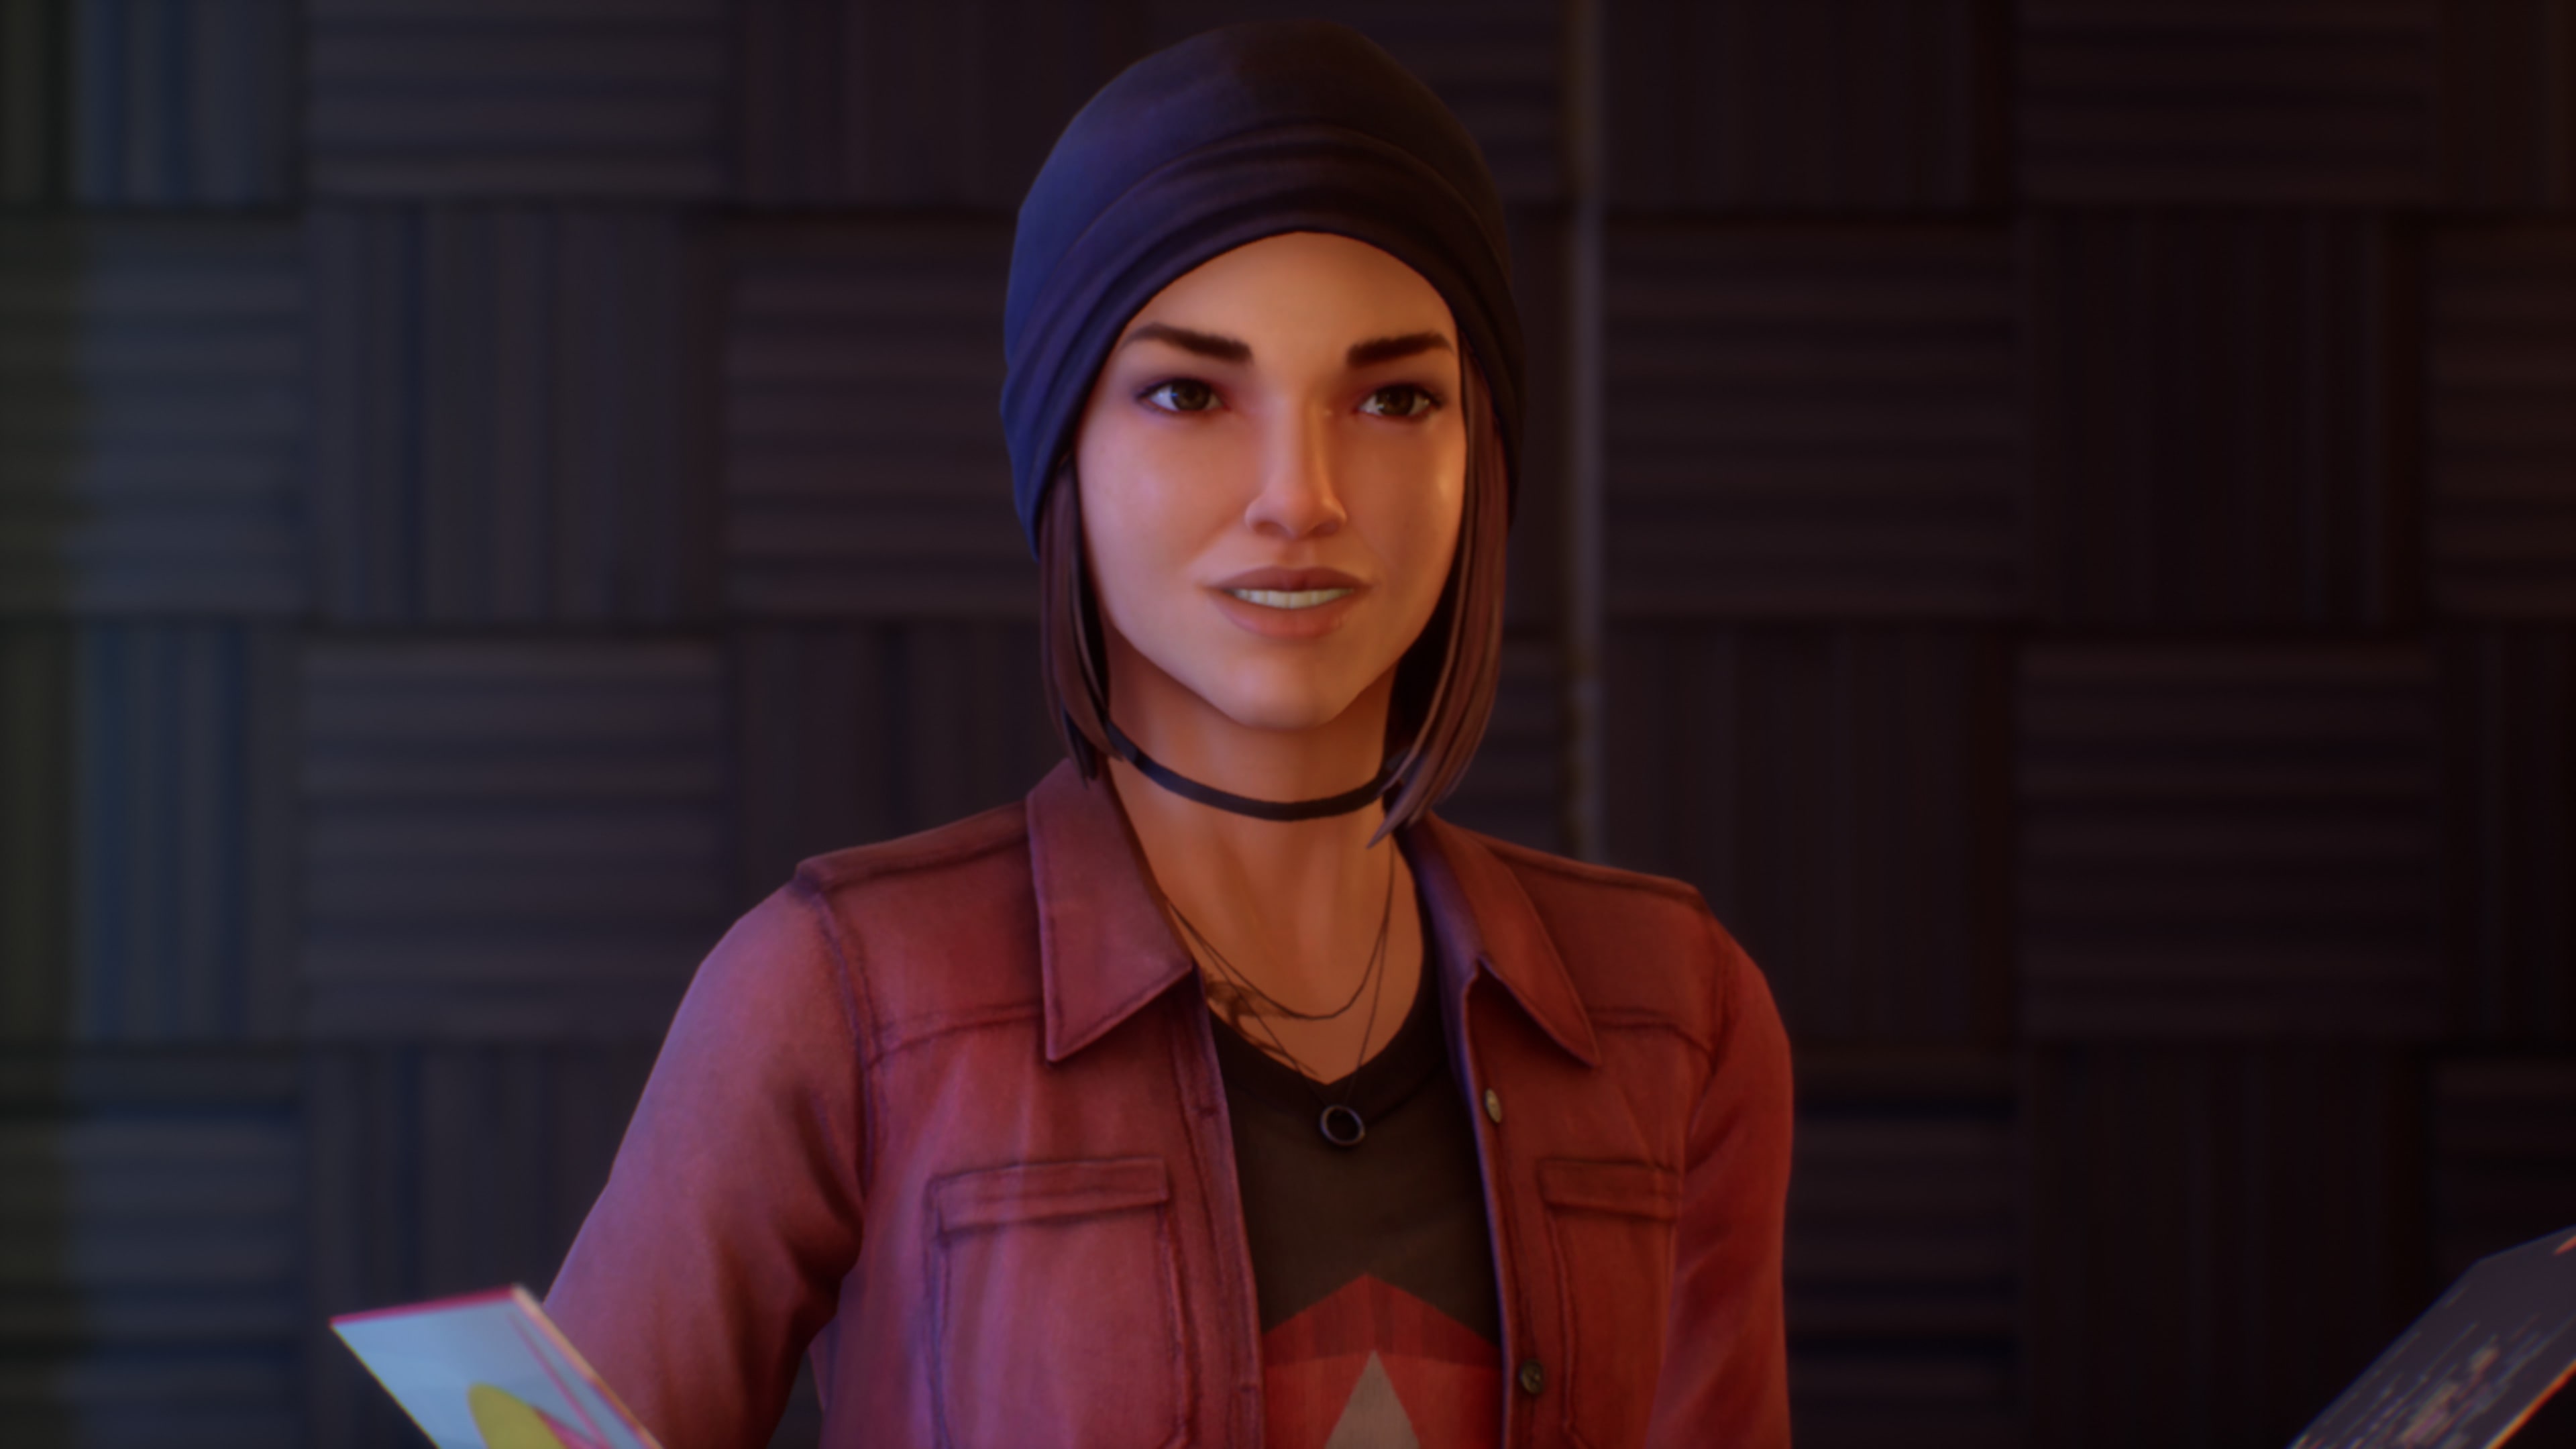 Life is Strange: True Colors - Deluxe Edition PS4 & PS5